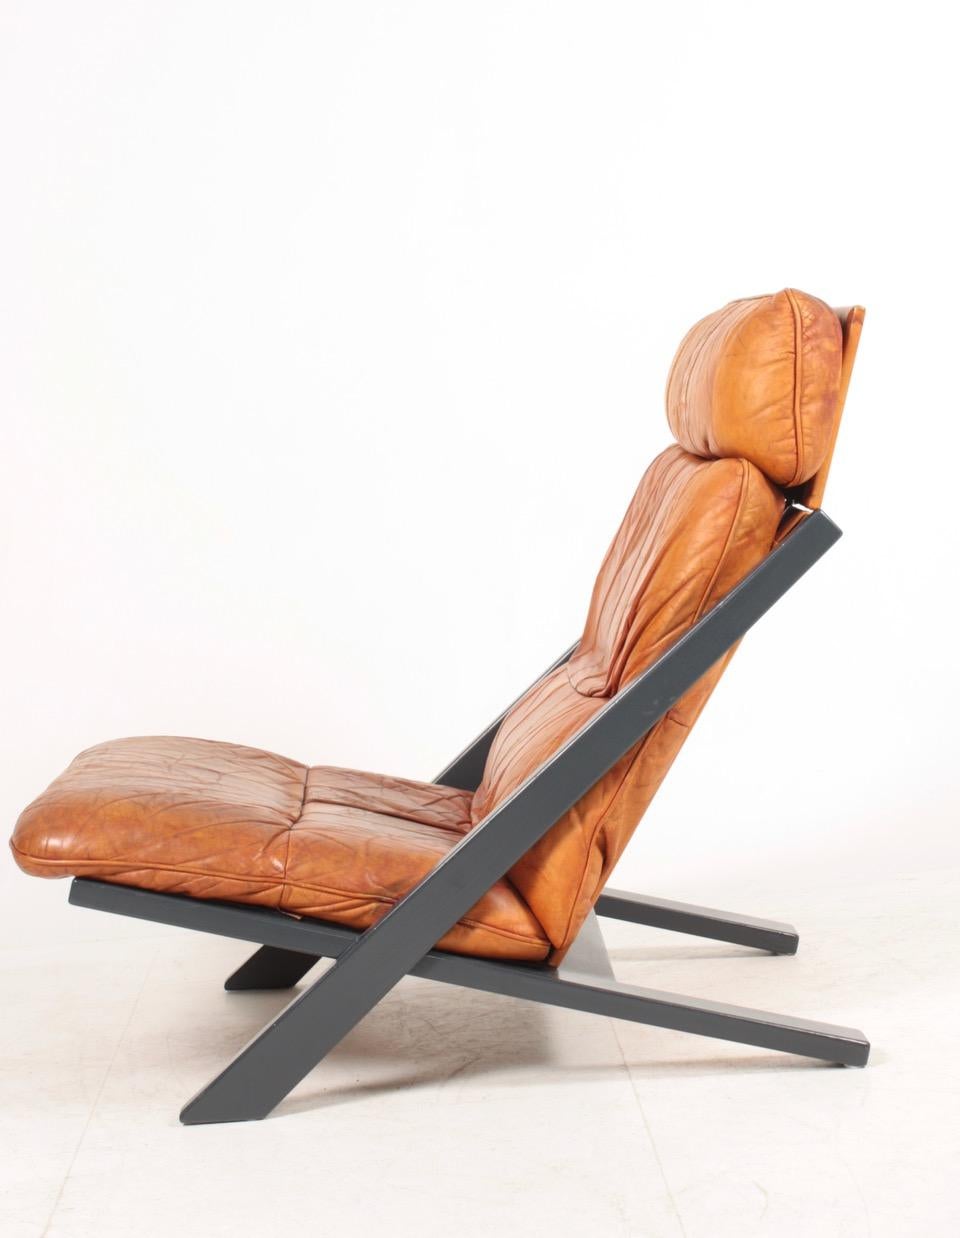 Mid-Century Modern Midcentury Lounge Chair by Ueli Berger for De Sede Lounge in Cognac Leather